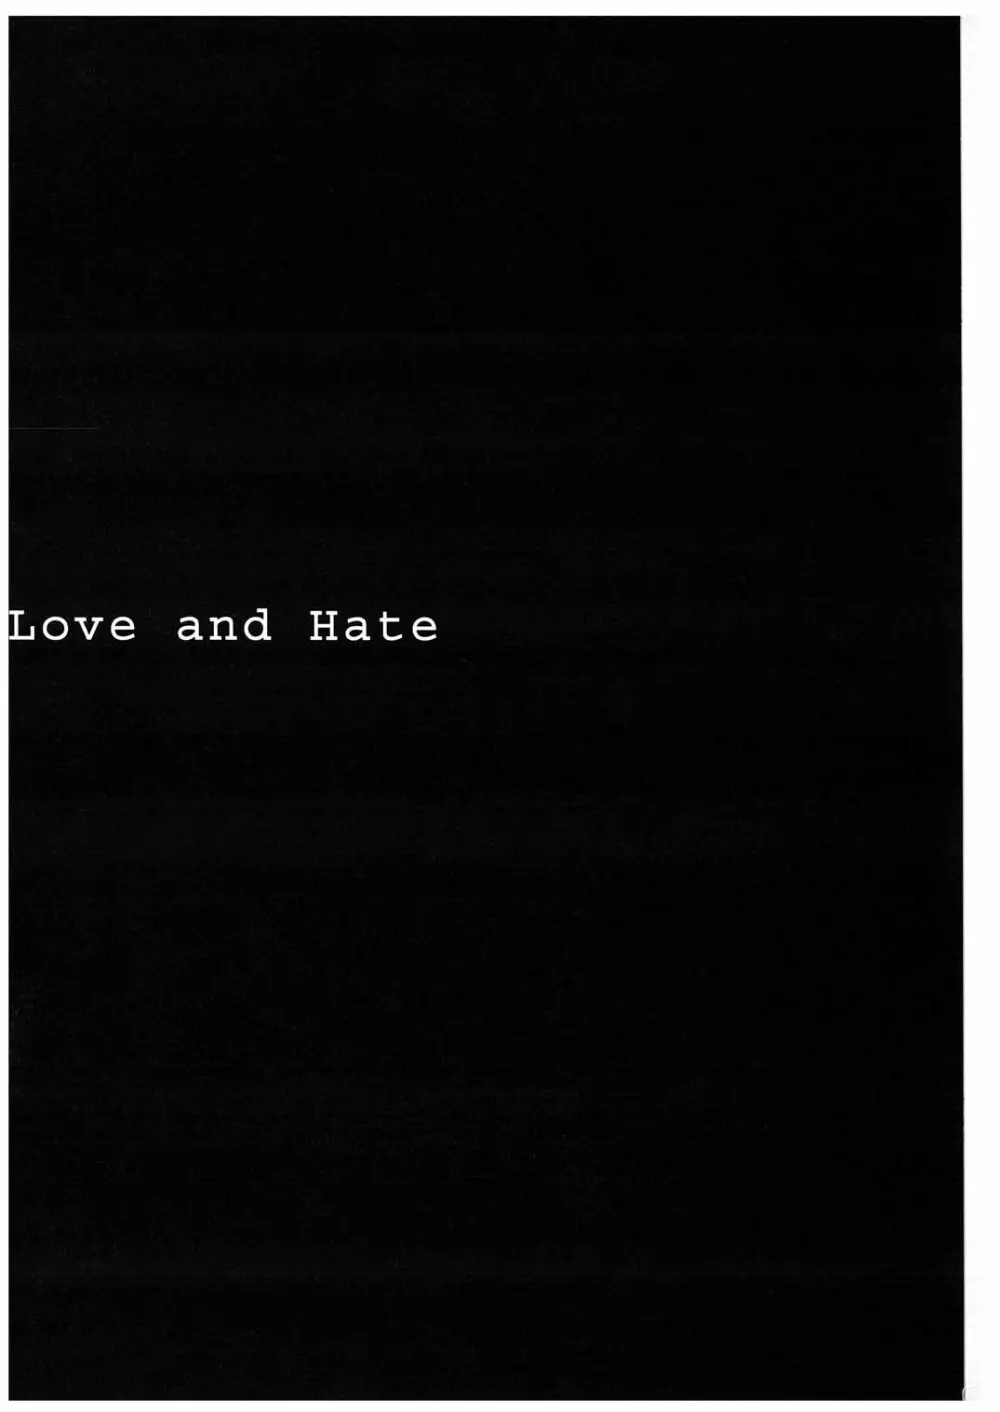 Love and Hate Page.2